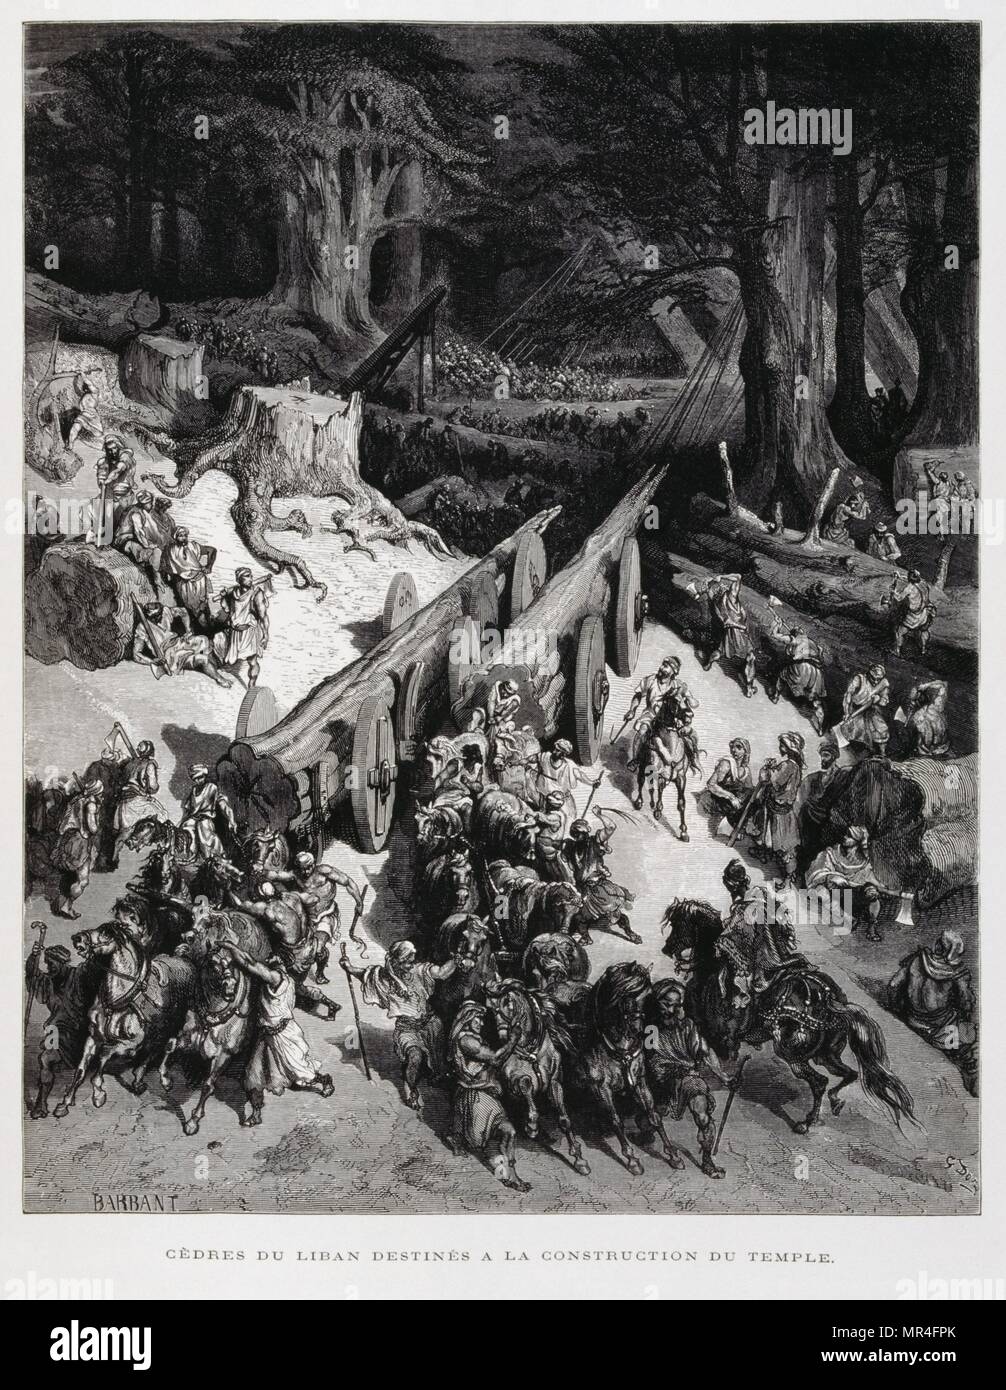 Cedars of Lebanon taken to construct the Temple in Jerusalem, Illustration from the Dore Bible 1866. In 1866, the French artist and illustrator Gustave Doré (1832–1883), published a series of 241 wood engravings for a new deluxe edition of the 1843 French translation of the Vulgate Bible, popularly known as the Bible de Tours. This new edition was known as La Grande Bible de Tours and its illustrations were immensely successful. Stock Photo